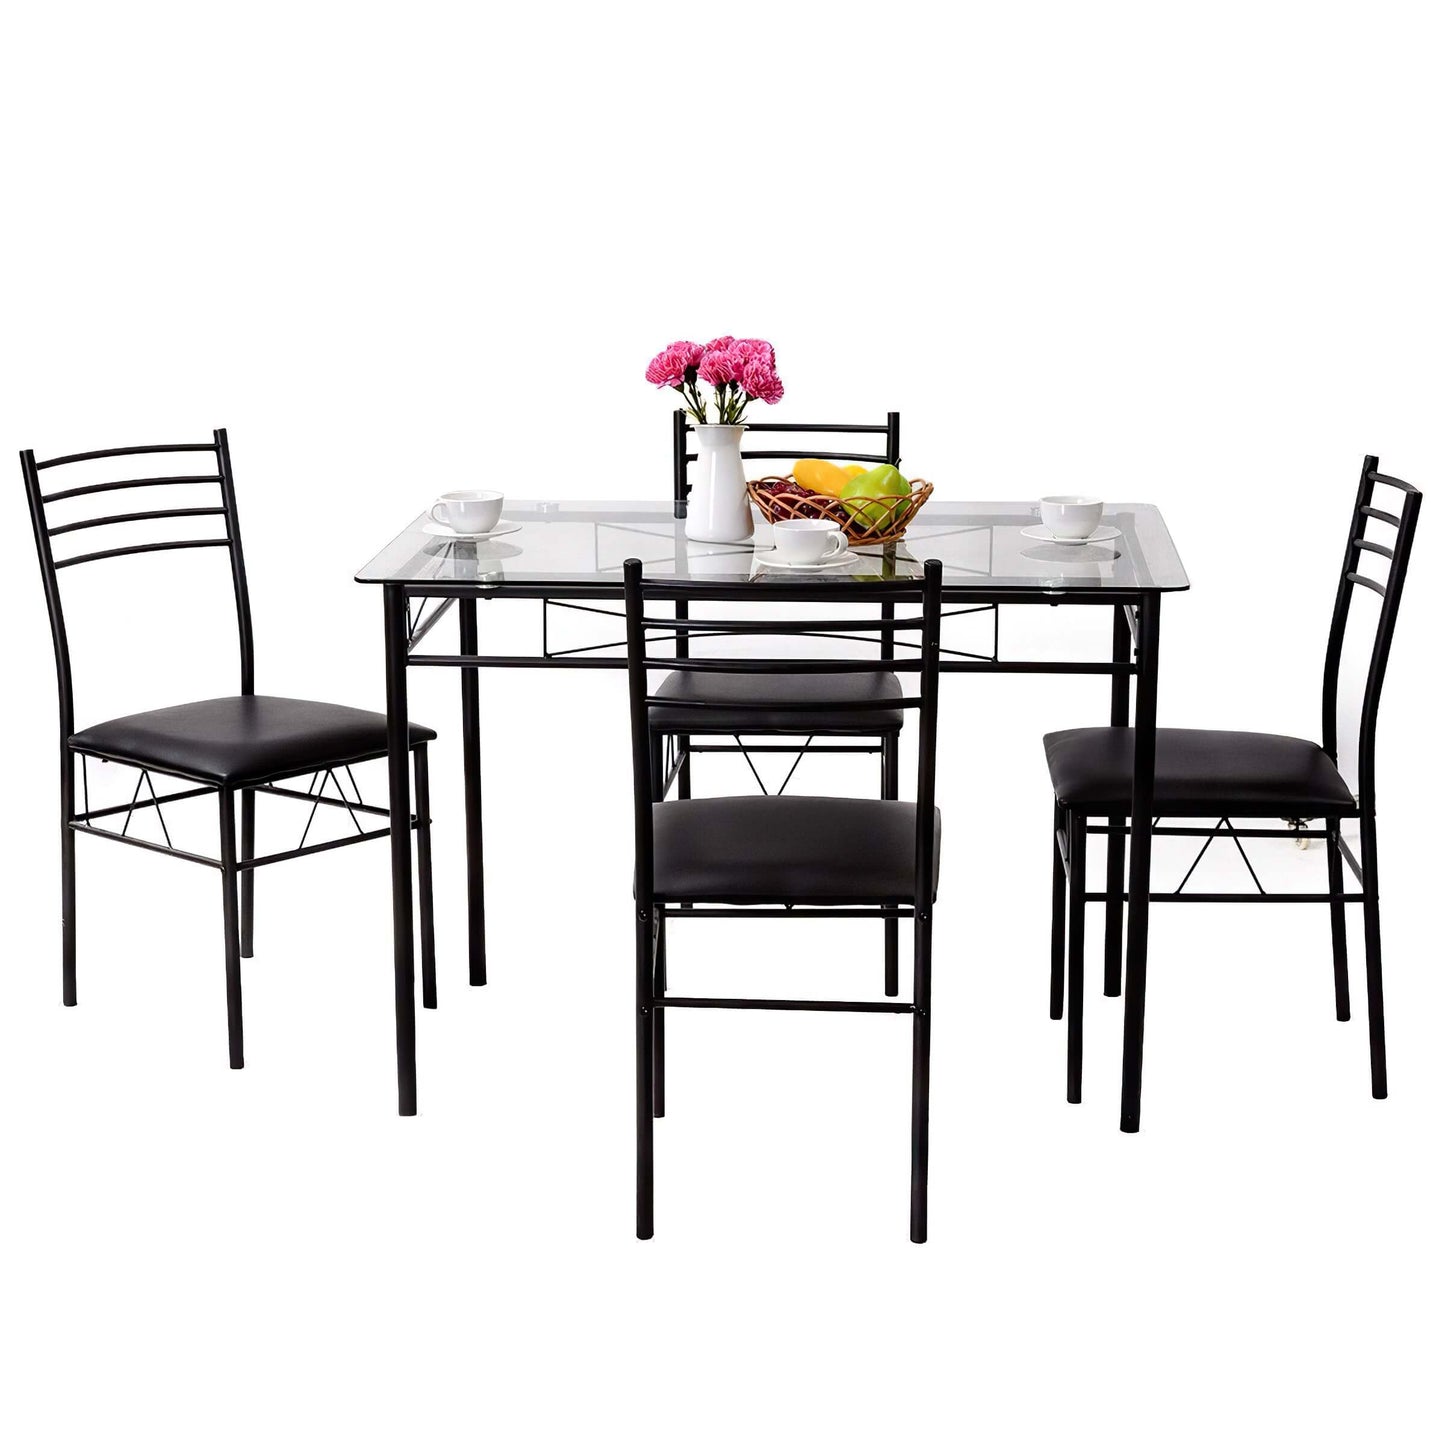 Sophisticated WETA 5-Piece Dining Set | Glass Top Table & 4 Upholstered Chairs | Modern Kitchen Room Furniture